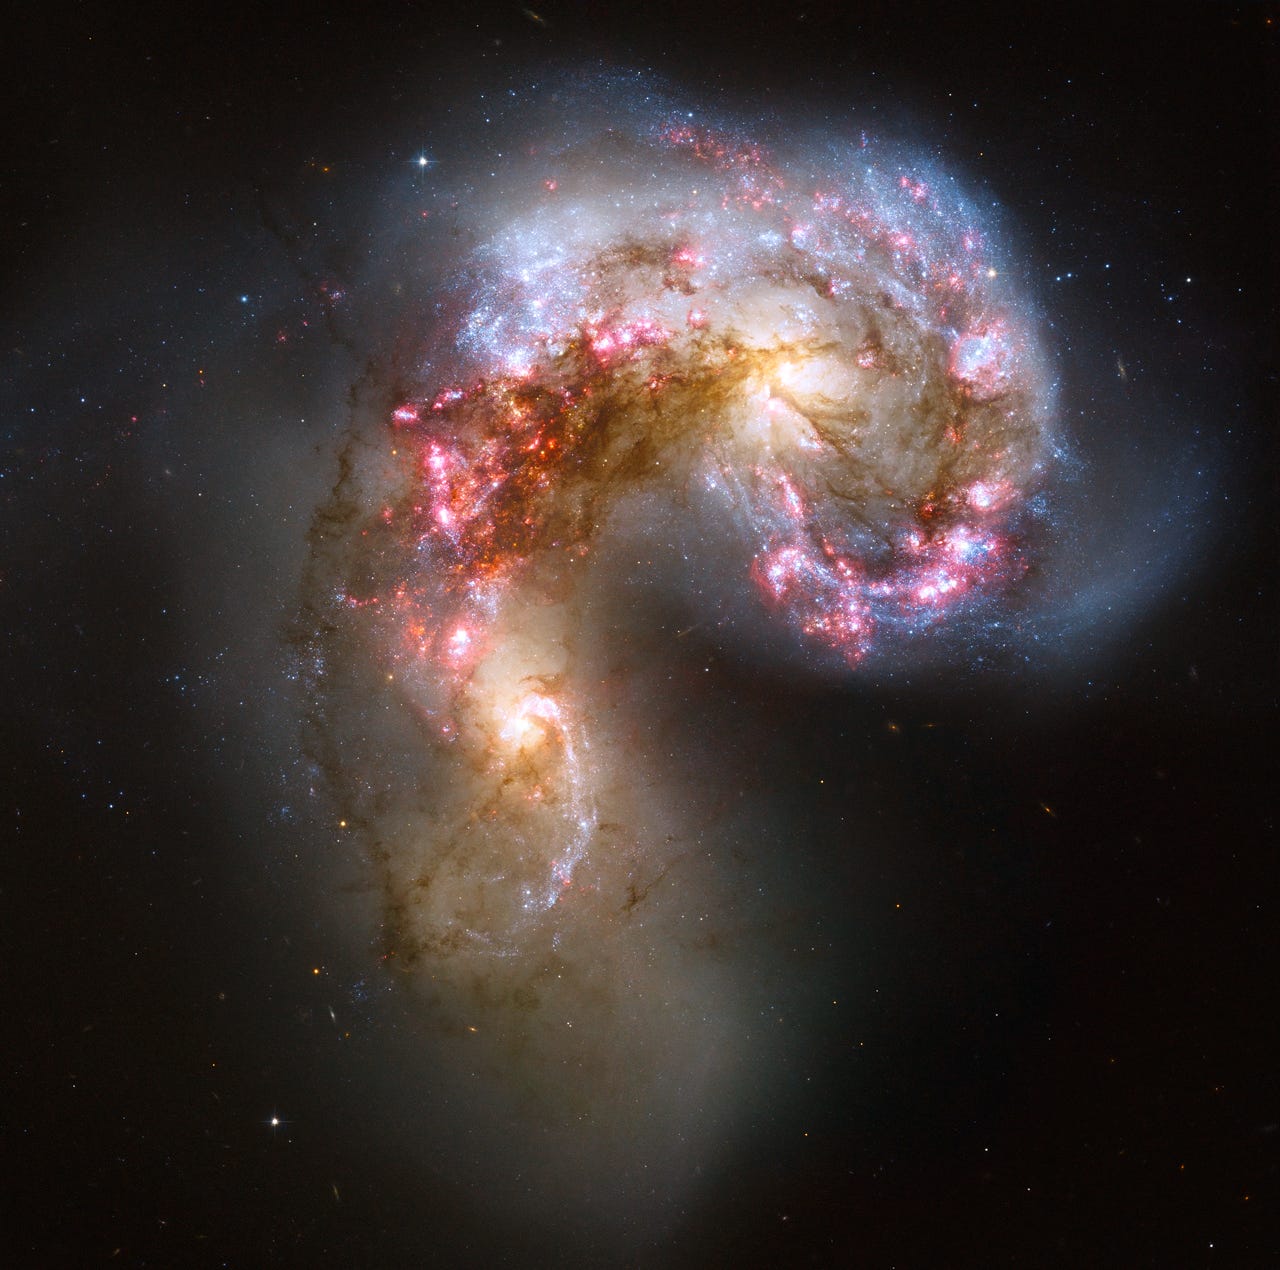 The Antennae Galaxies/NGC 4038-4039 | HubbleSite